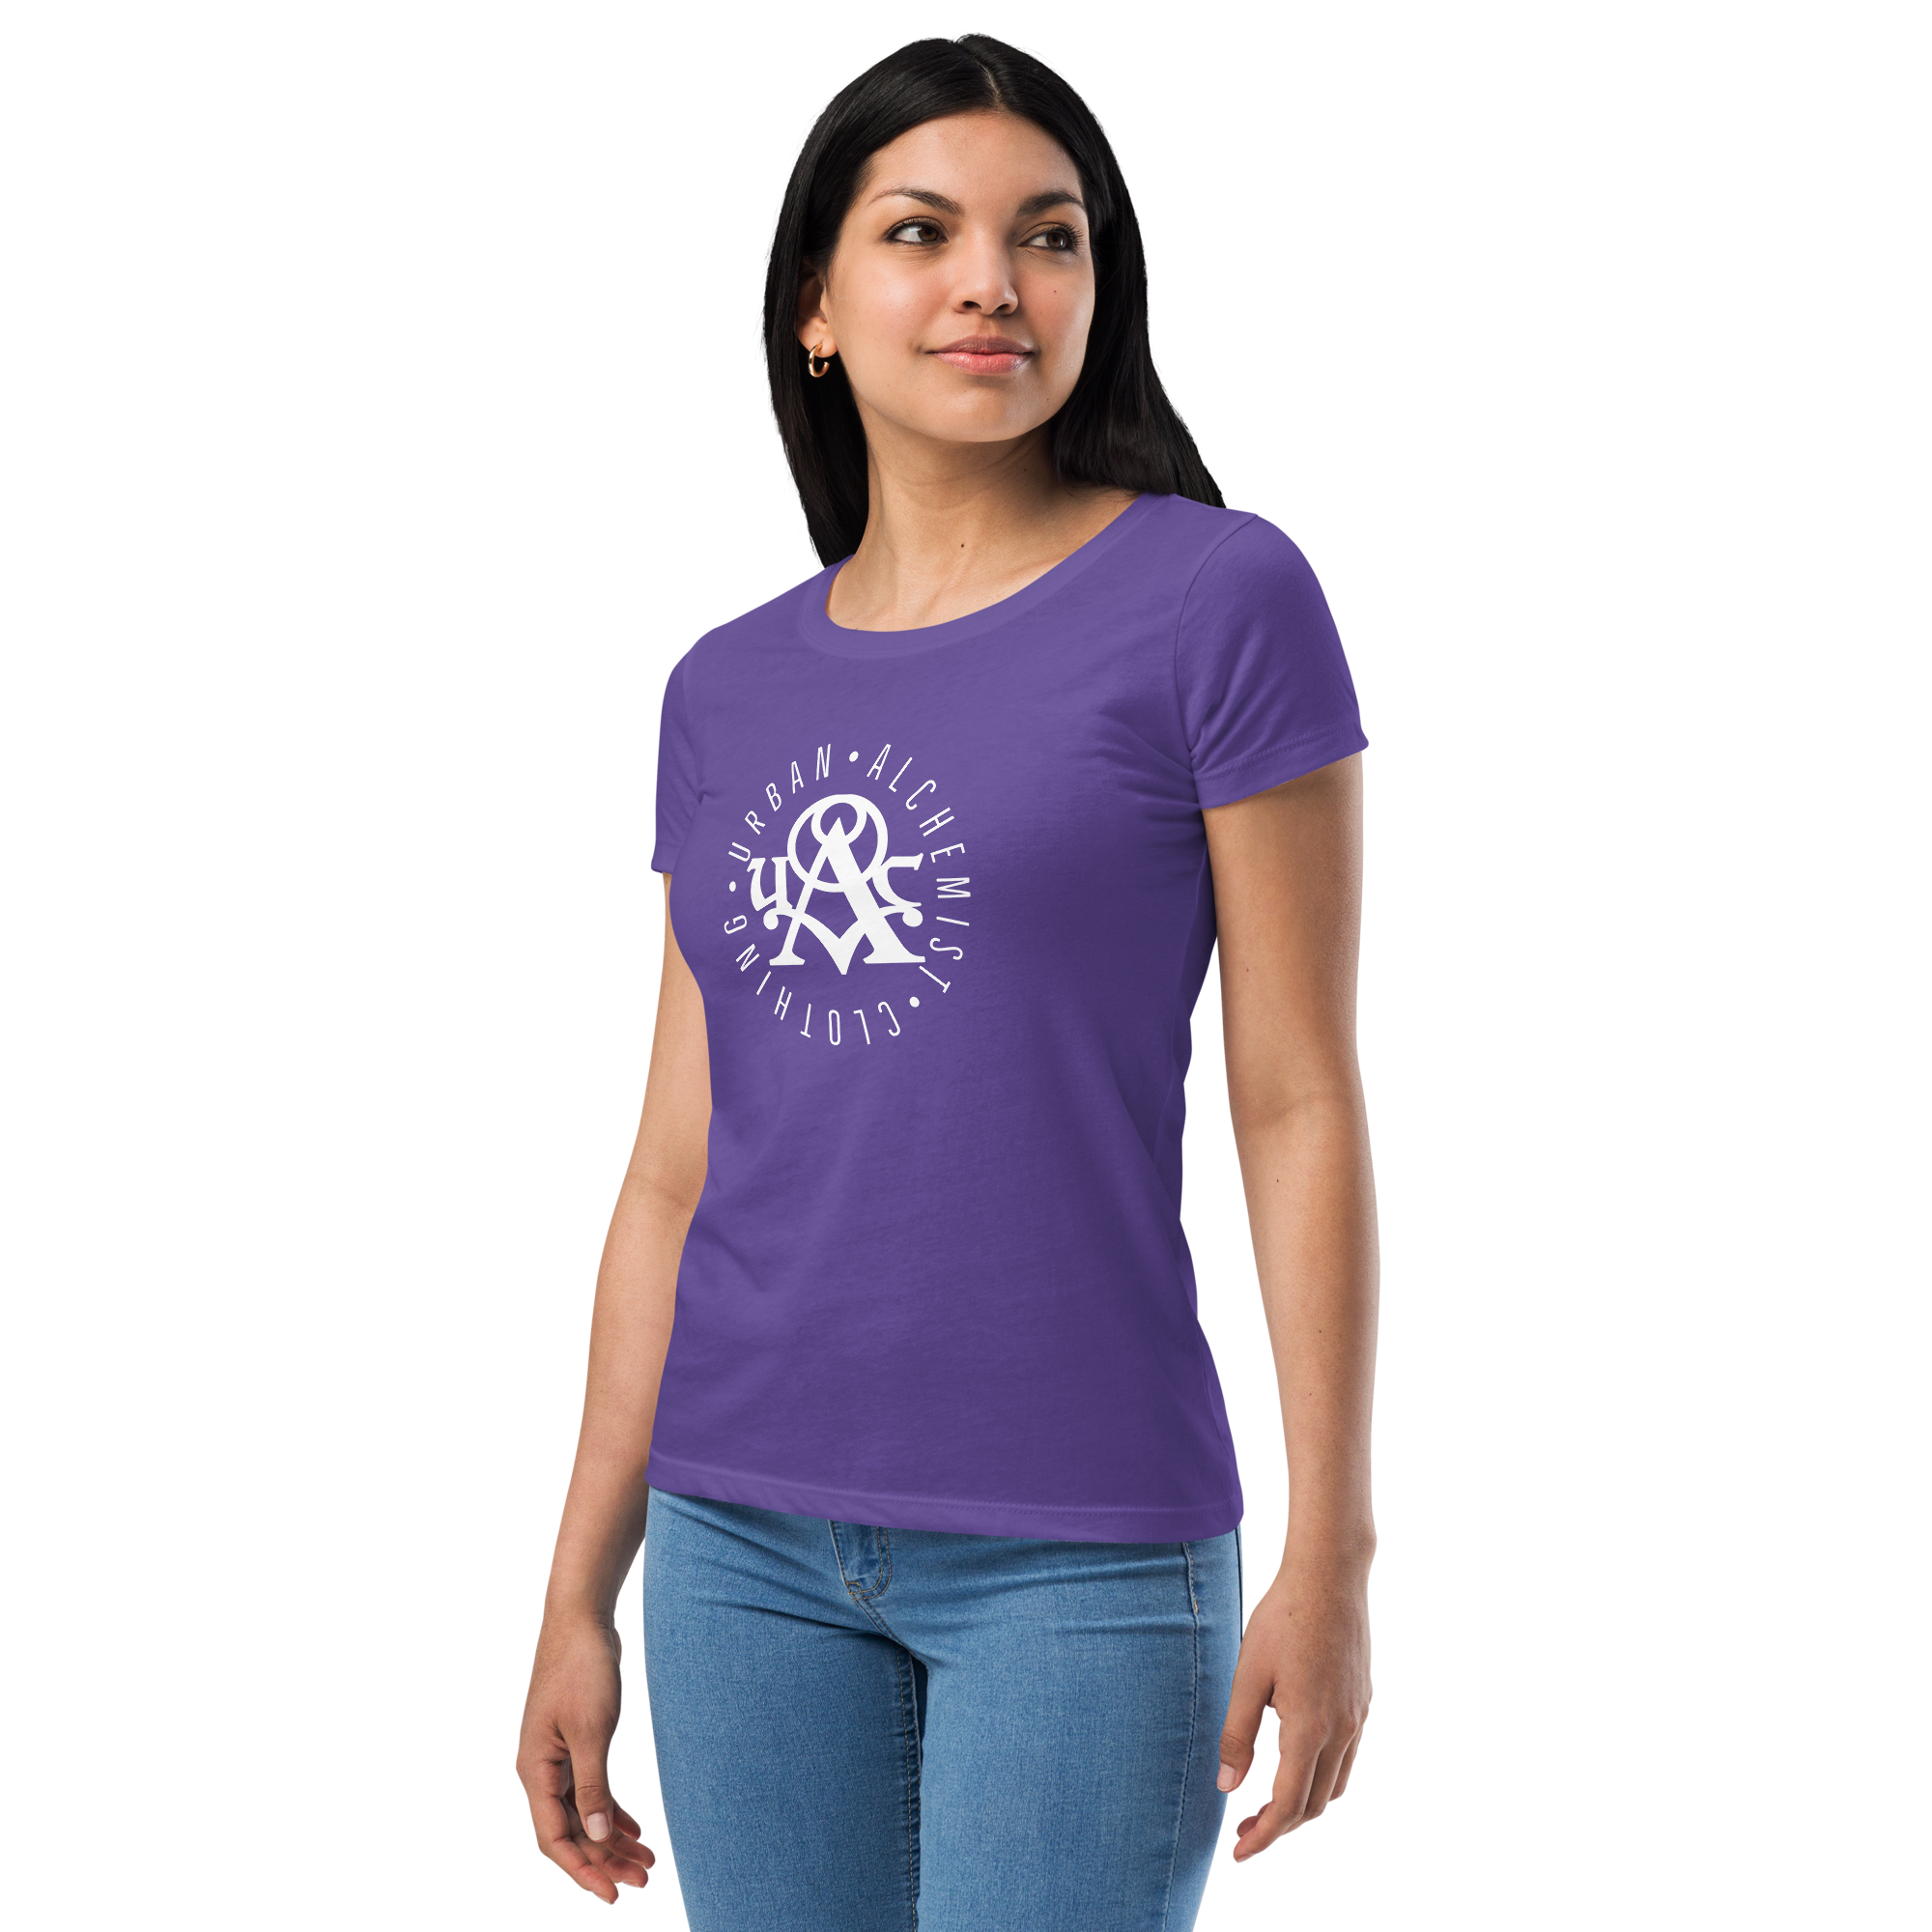 Tight Circle - Women’s fitted t-shirt